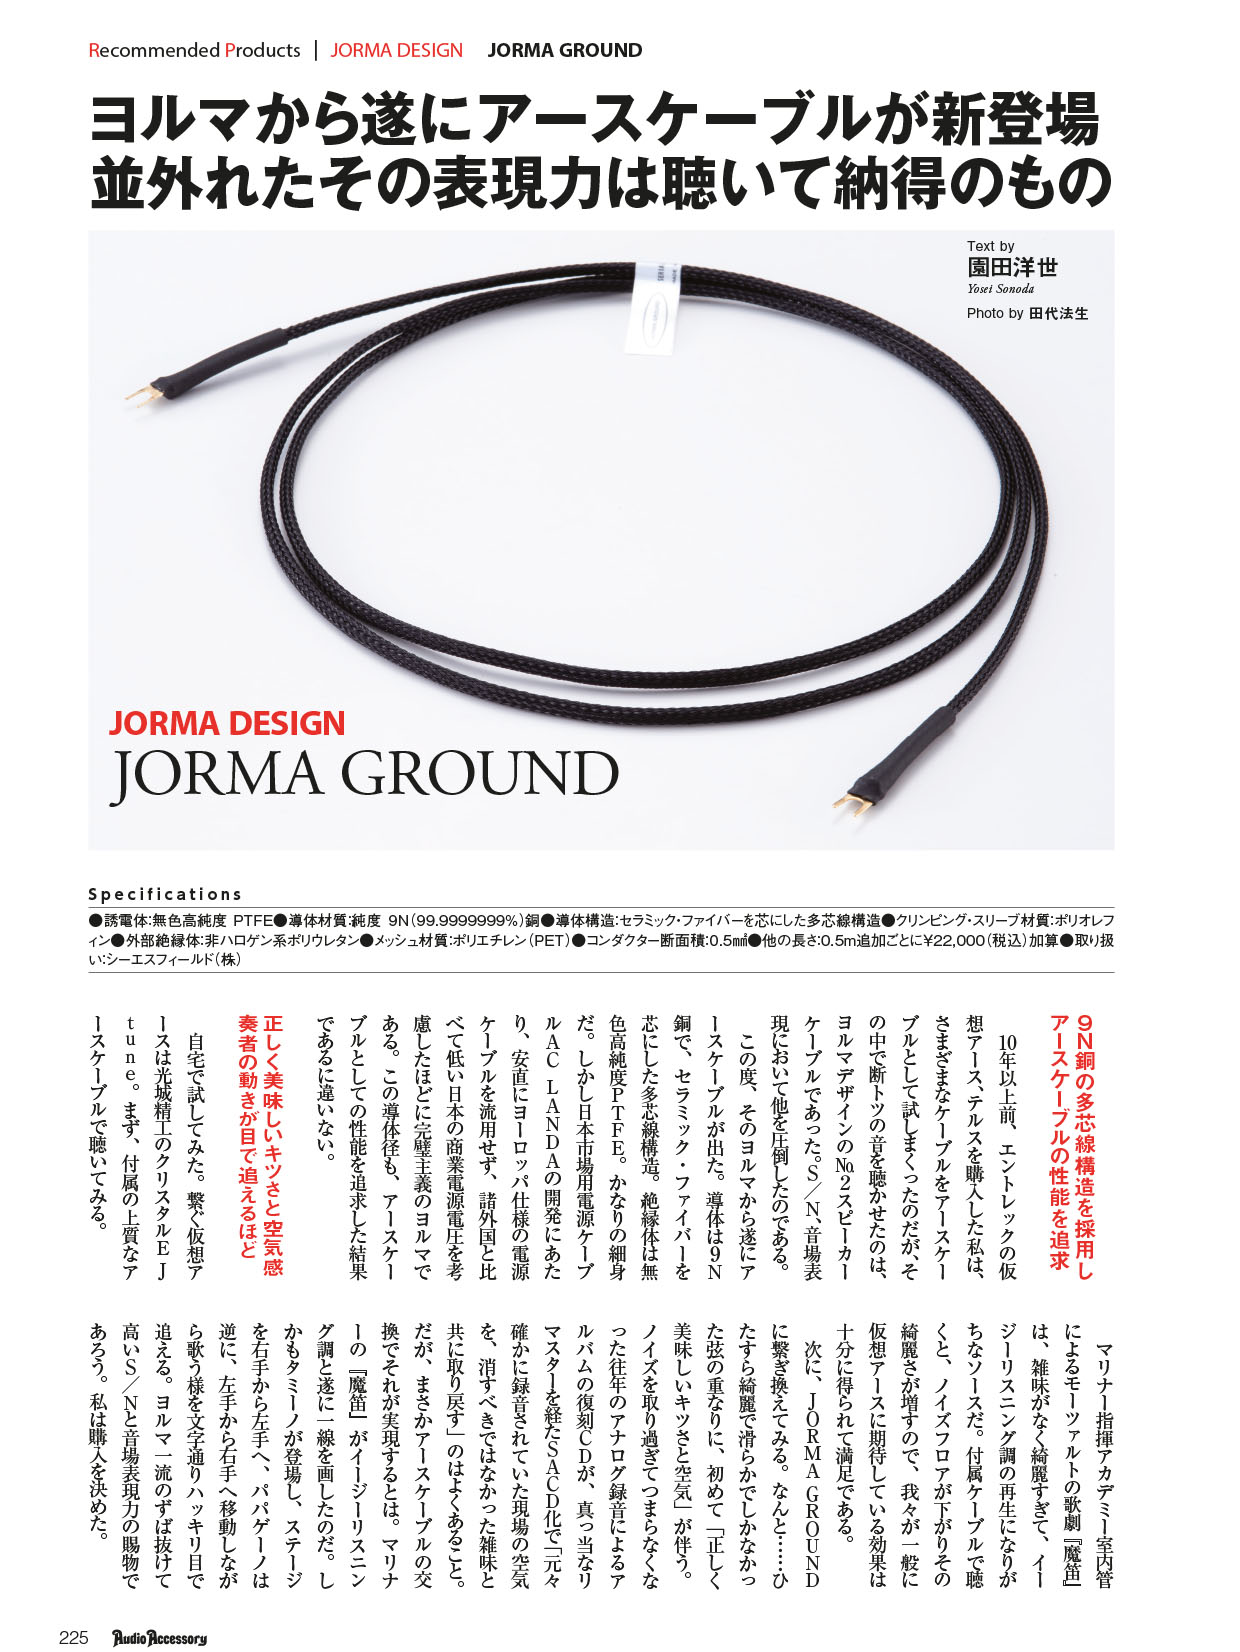 Jorma Ground review in Audio Accessory